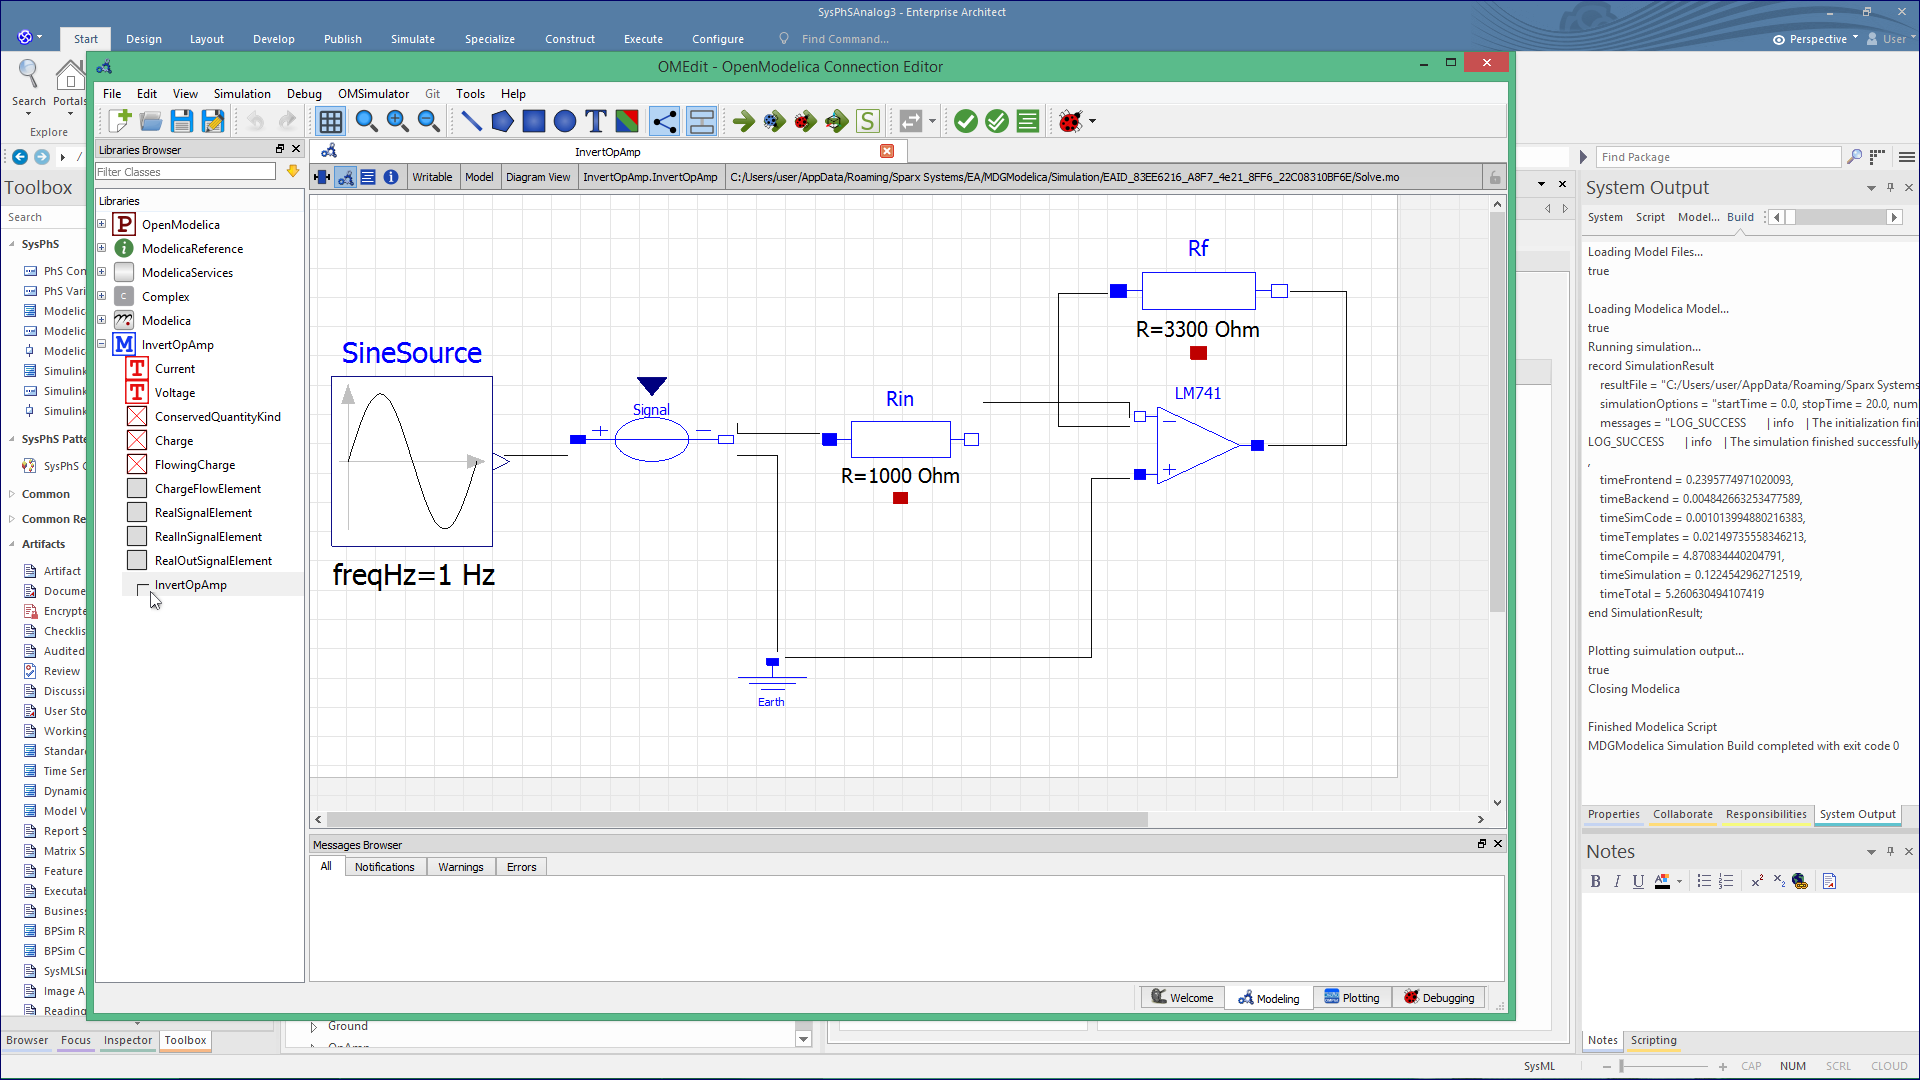 View your SysML components in OpenModelica